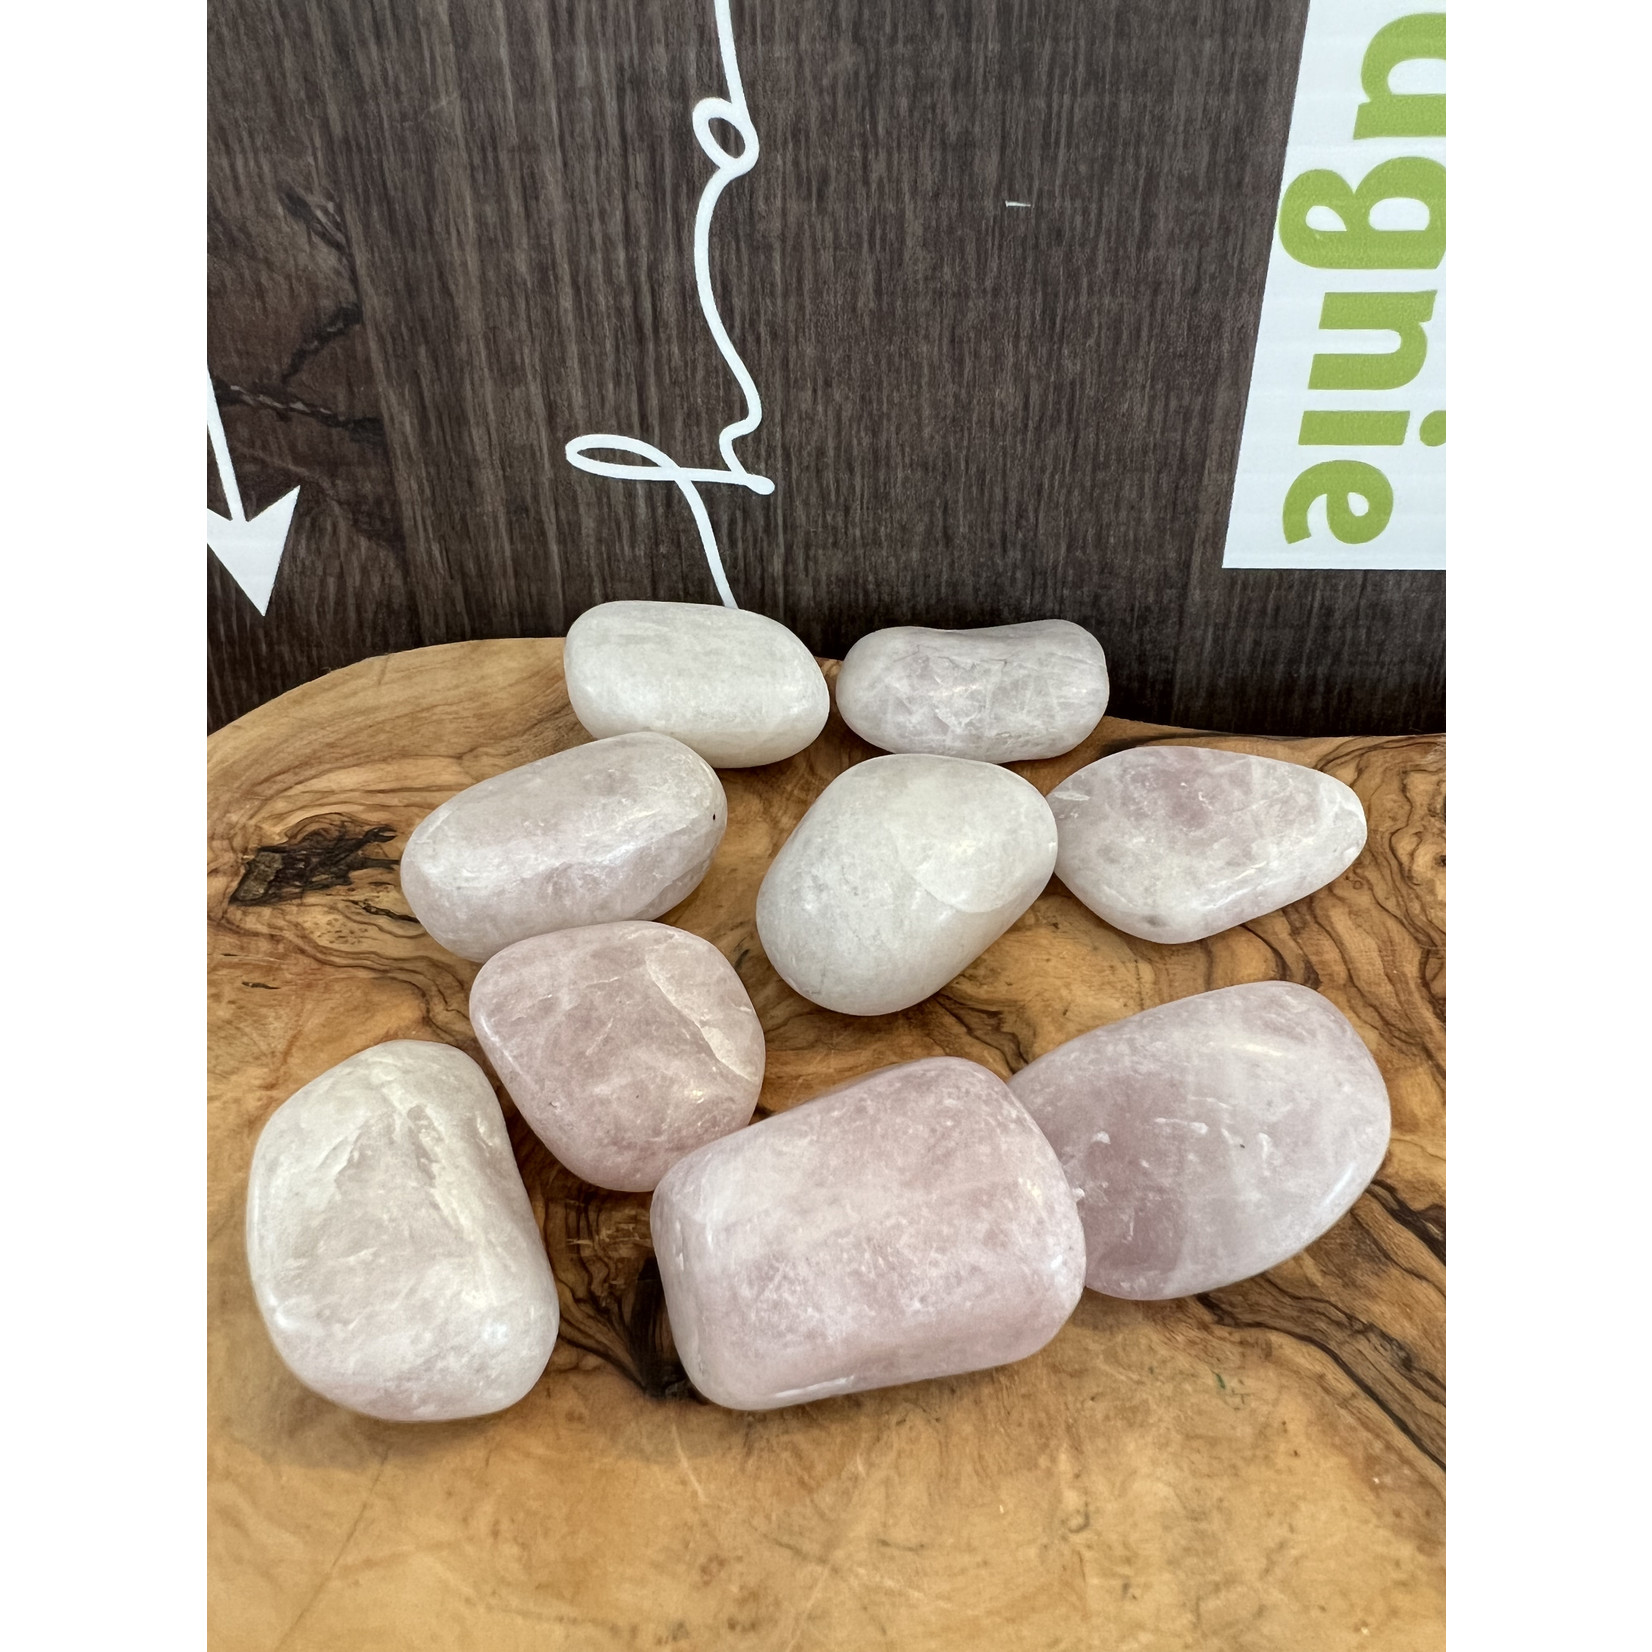 kunzite tumbled stone, used to calm migraines, neck pain due to blood pressure, exhaustion or overwork